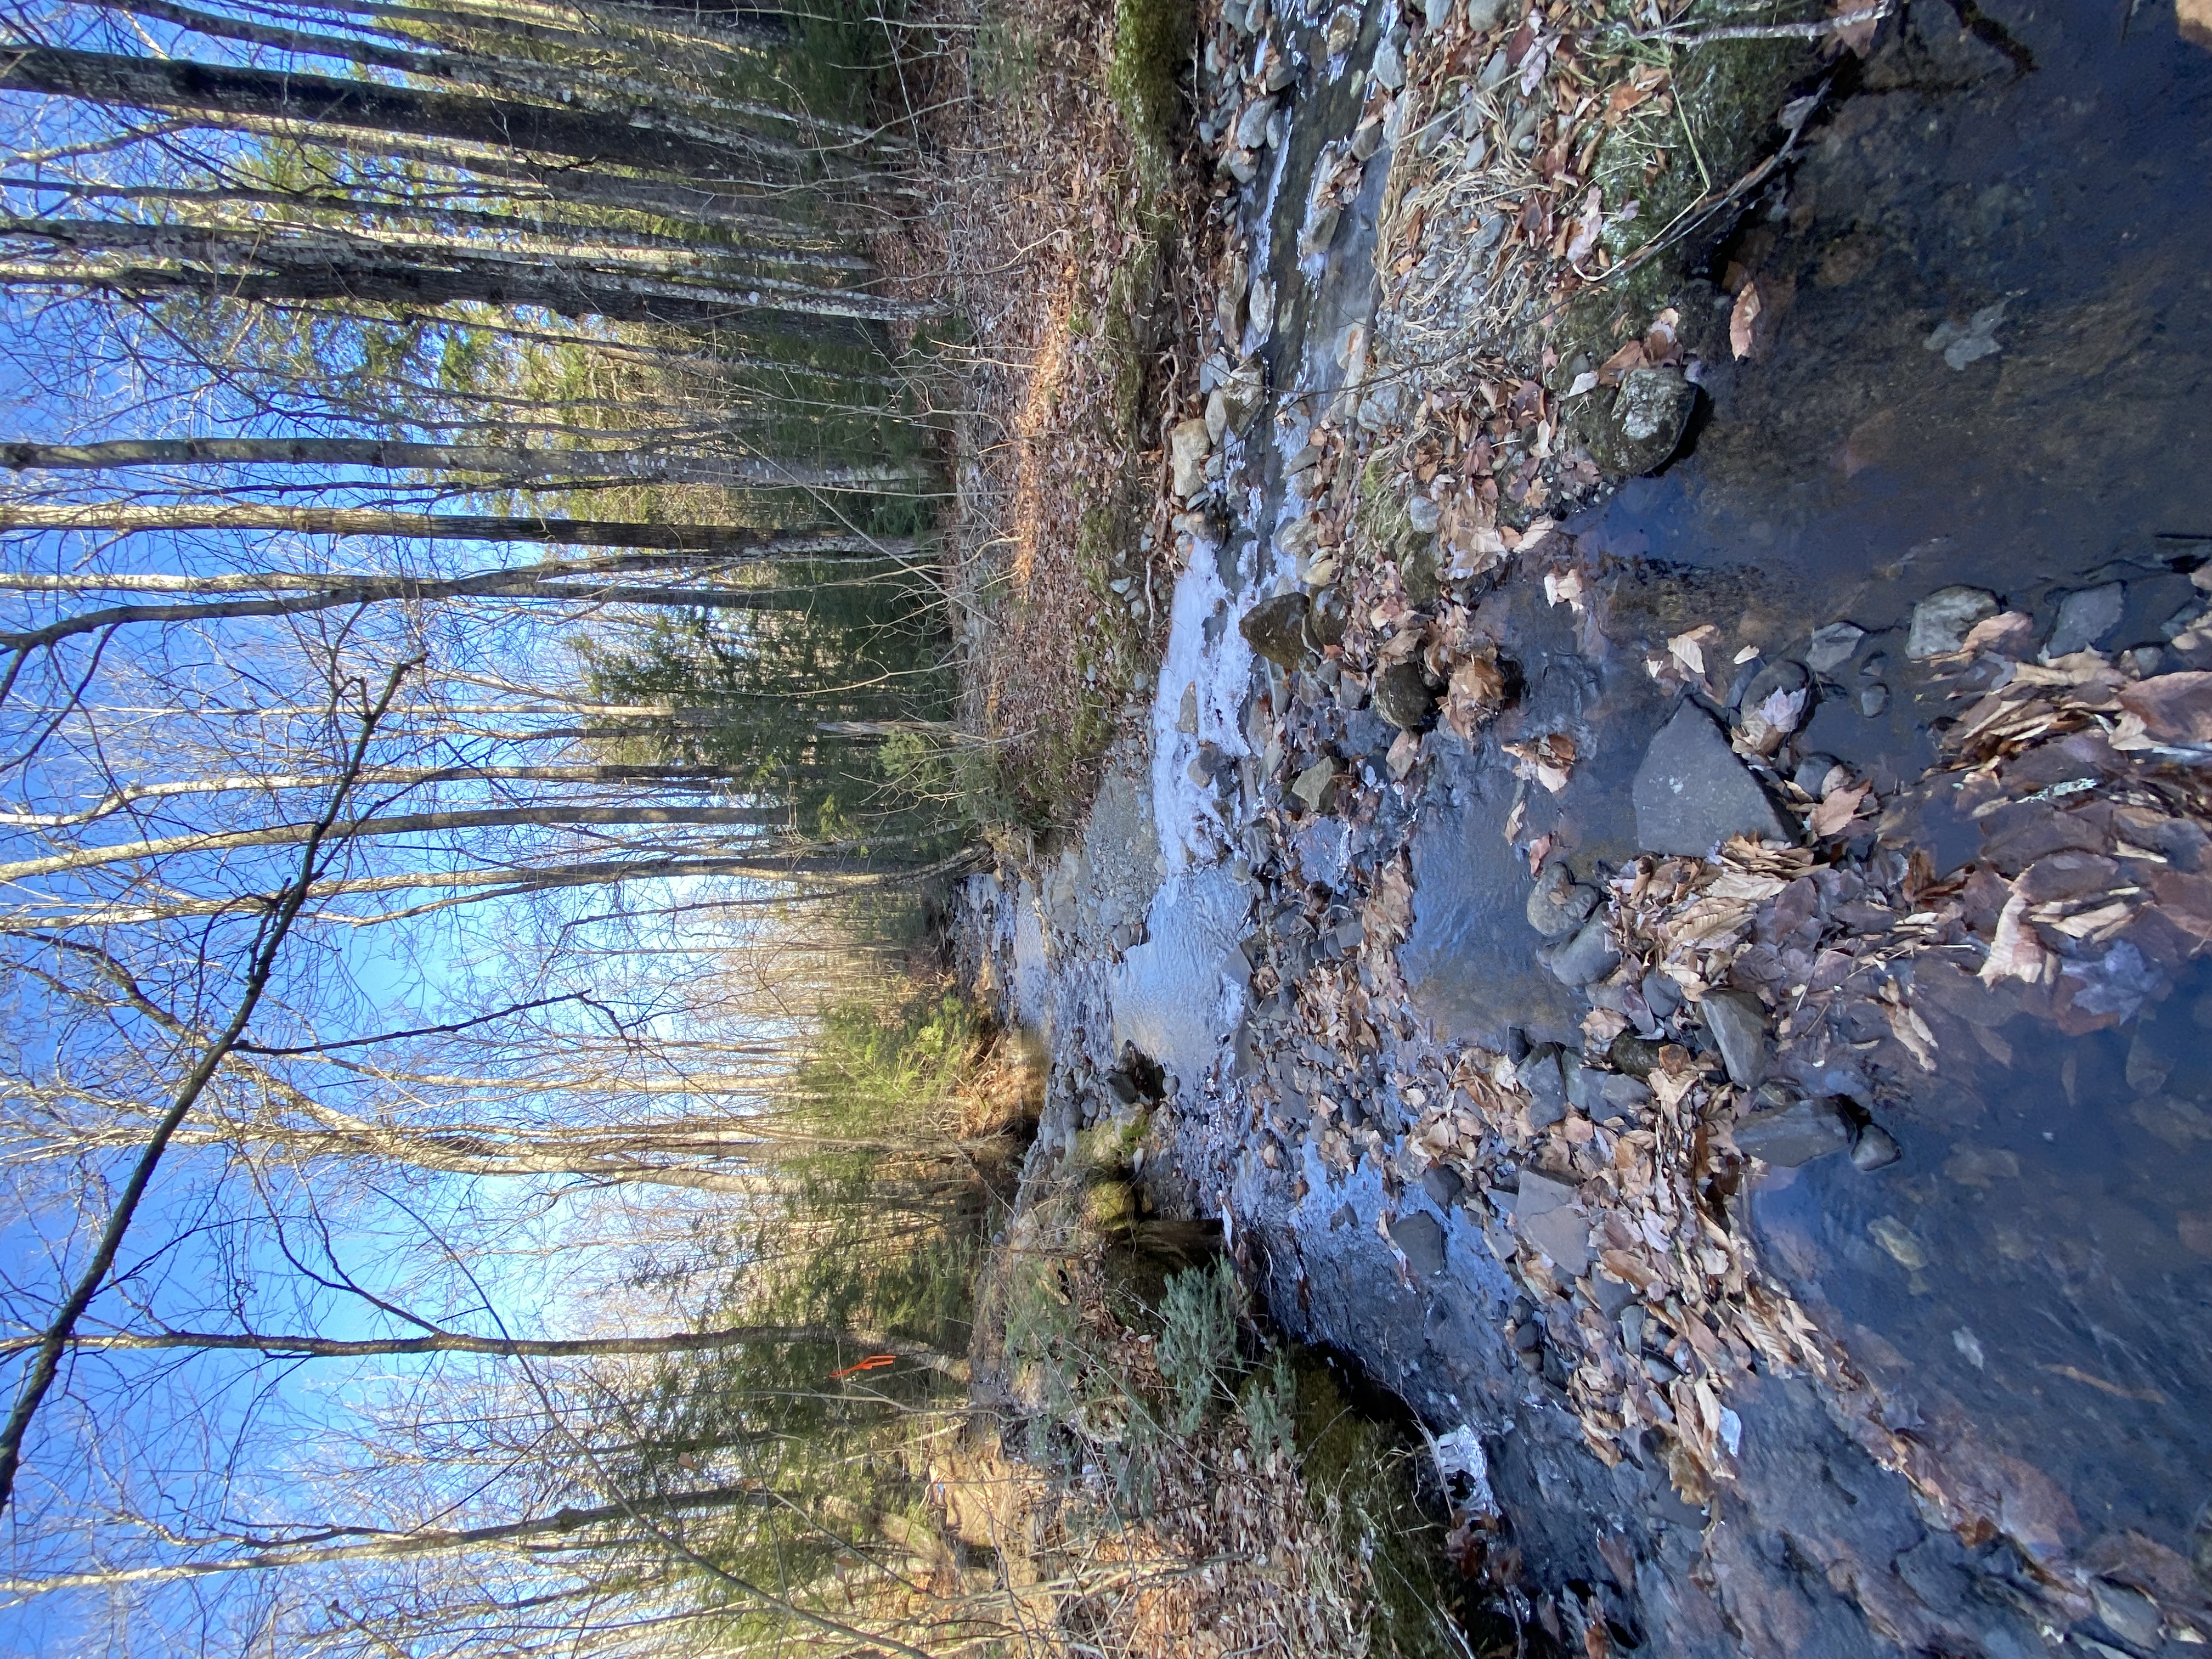 An image of the same spot with the dam removed.